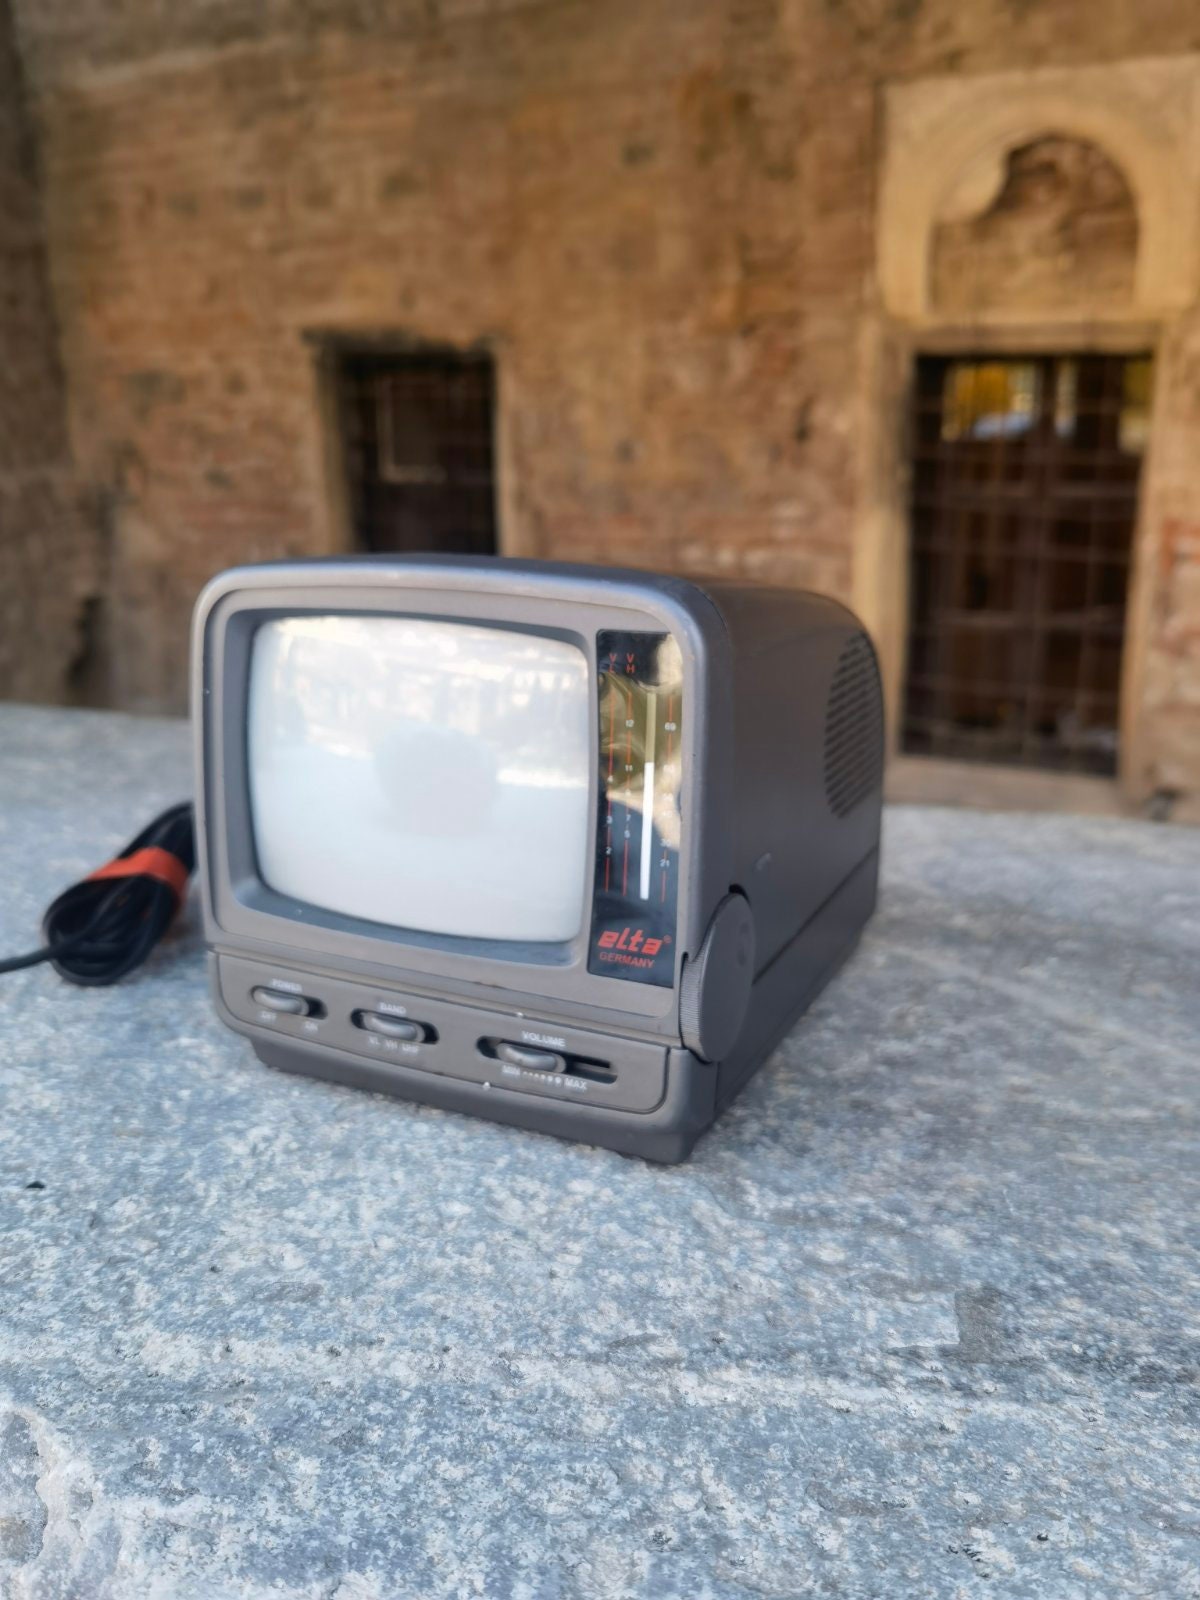 Vintage extra mini television, mini portable ELT8 television made in Germany